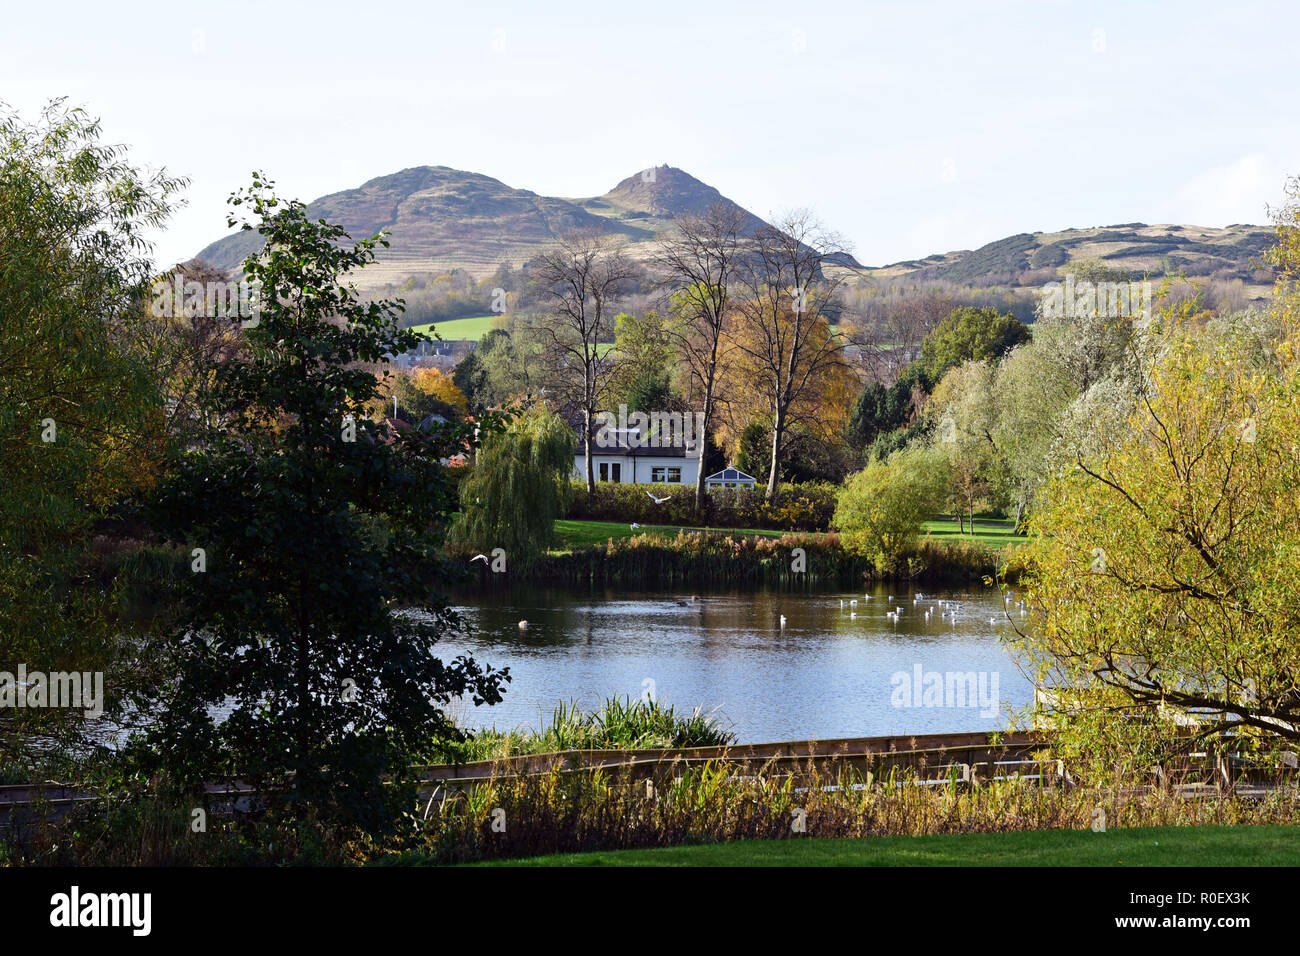 Scotland, UK. 4th Nov 2018.  A view of Arthur's Seat - the extinct volcano in the heart of Edinburgh - from Figgate Park, in late autumn sunshine, © Ken Jack / Alamy Live News Stock Photo